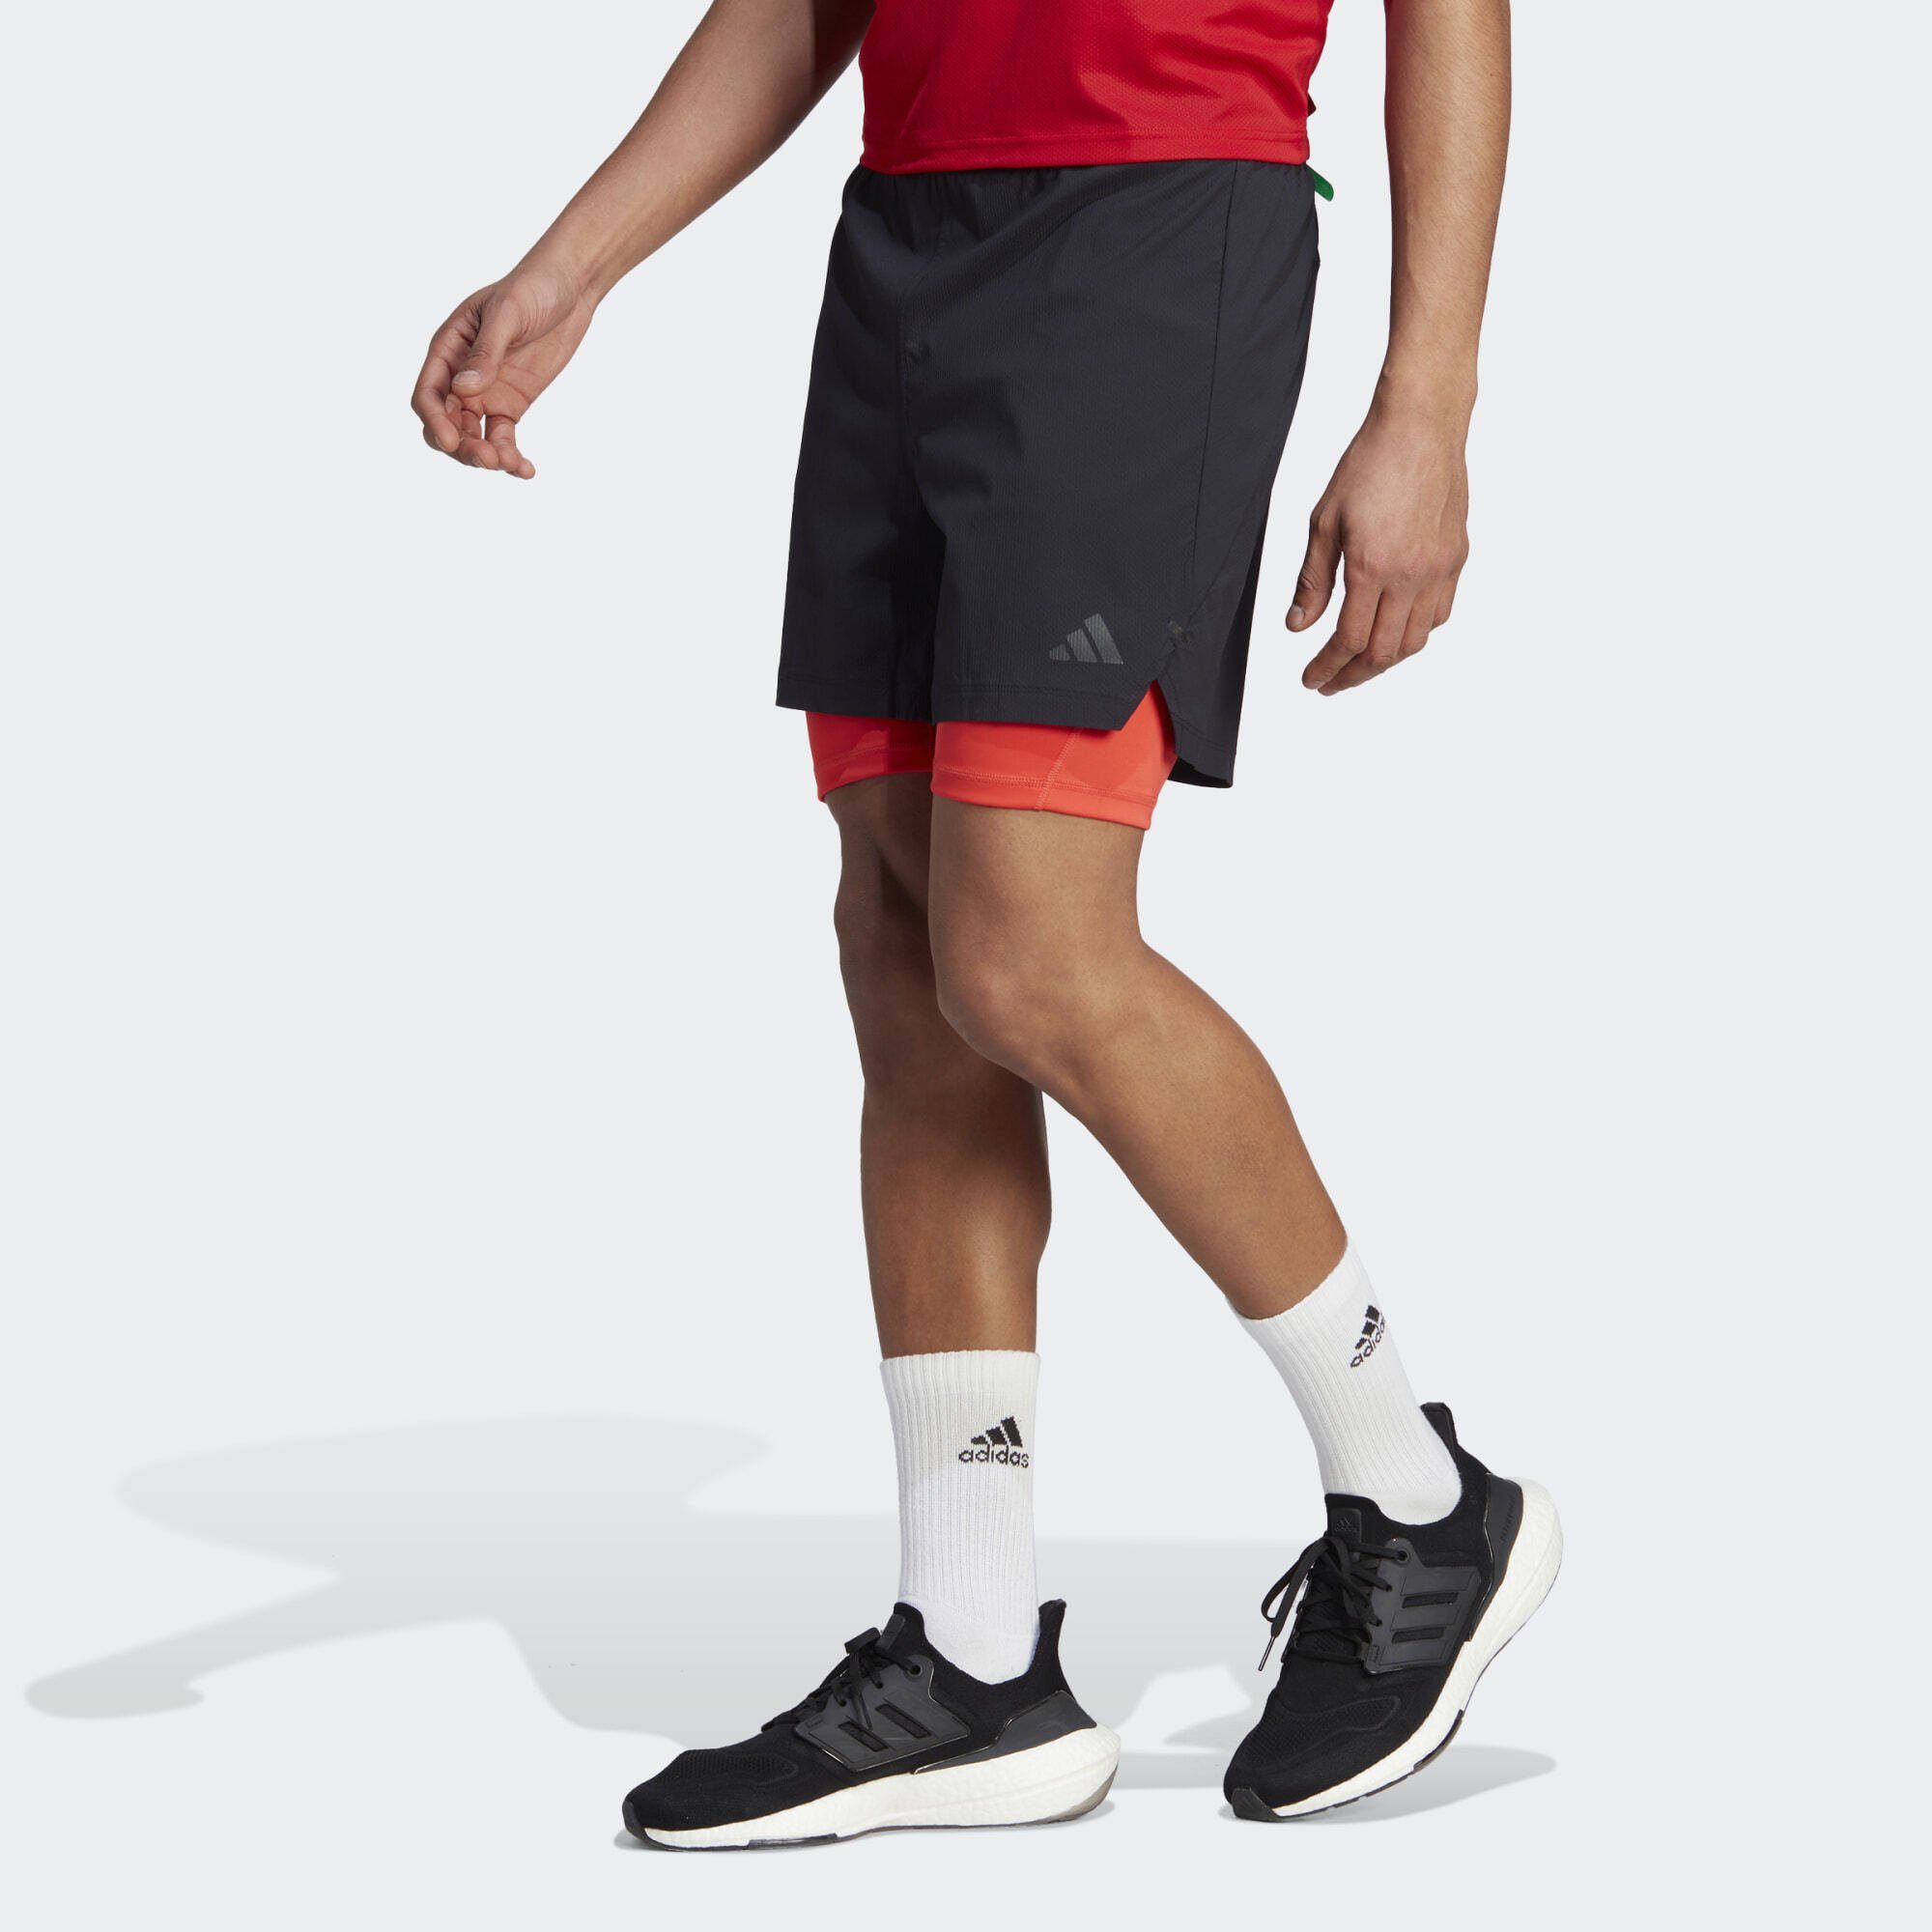 Black / adidas 2-in-1-Shorts Black Performance Red TWO-IN-ONE / Bright POWER SHORTS WORKOUT